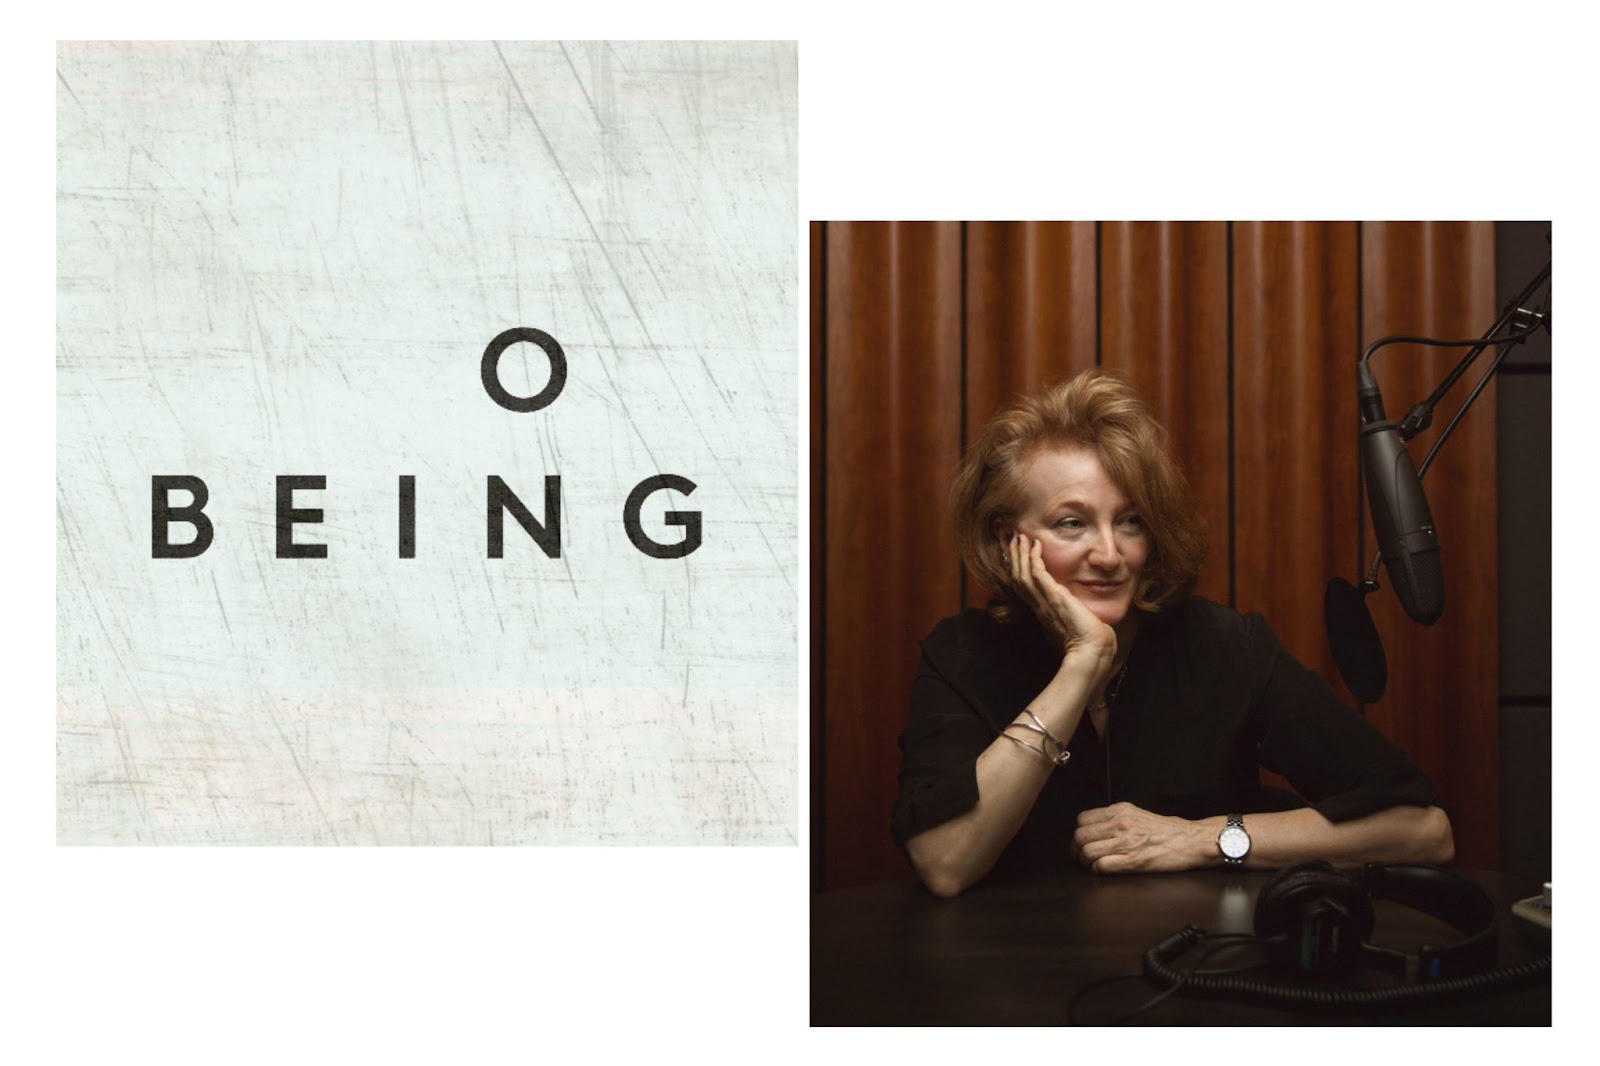 image cover of interview podcast "On Being", Photo of the host of podcast Krista Tippett